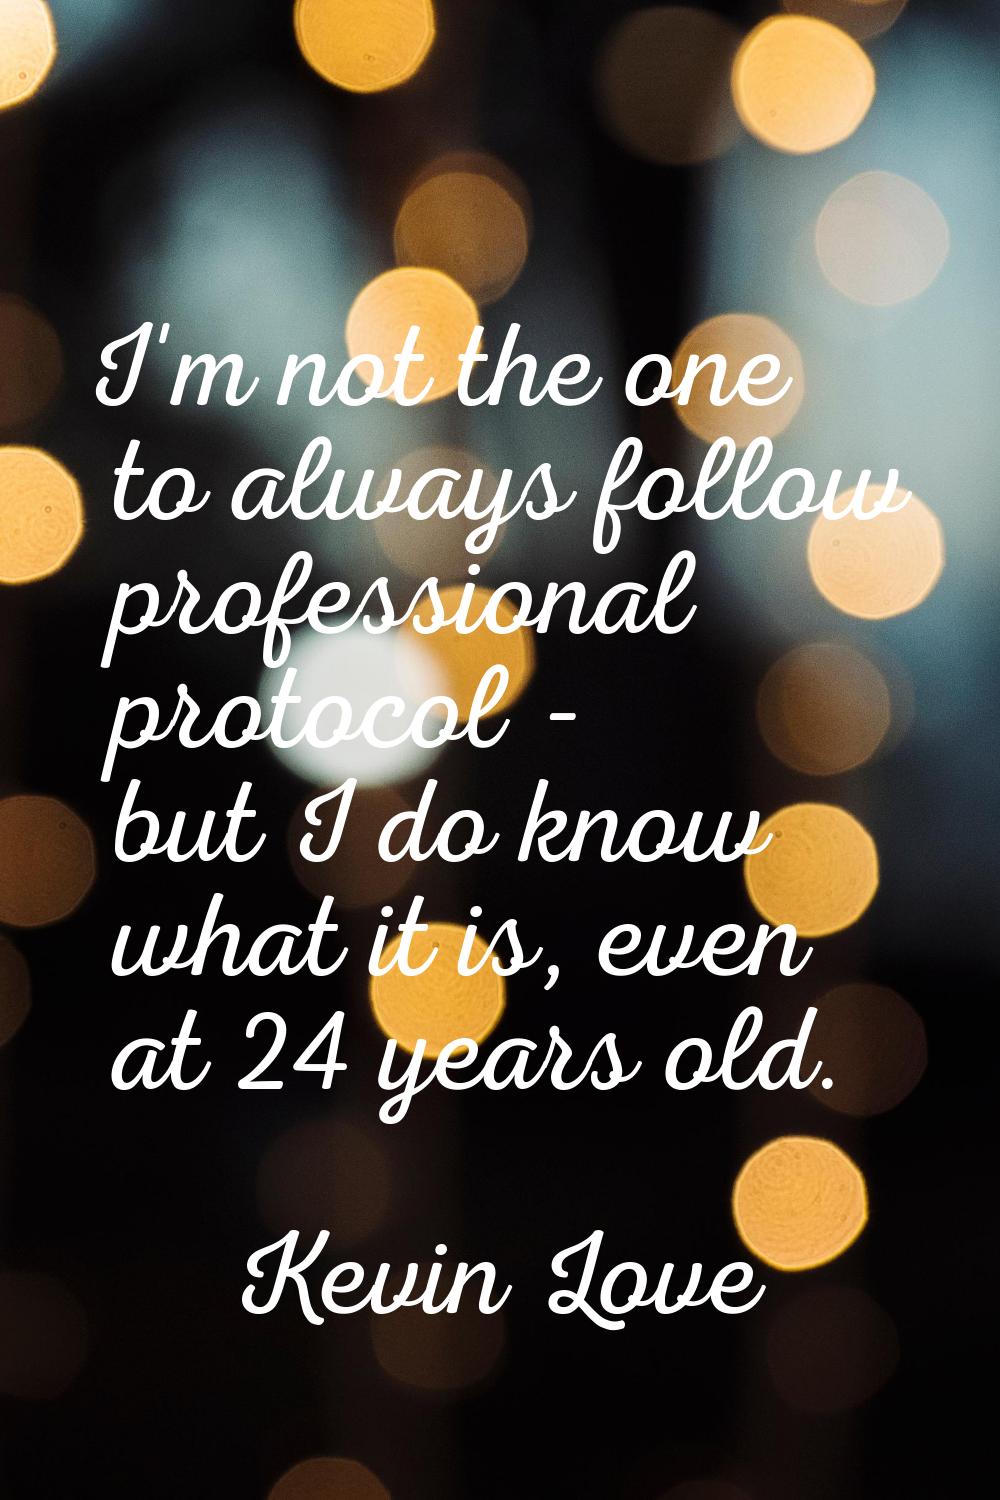 I'm not the one to always follow professional protocol - but I do know what it is, even at 24 years